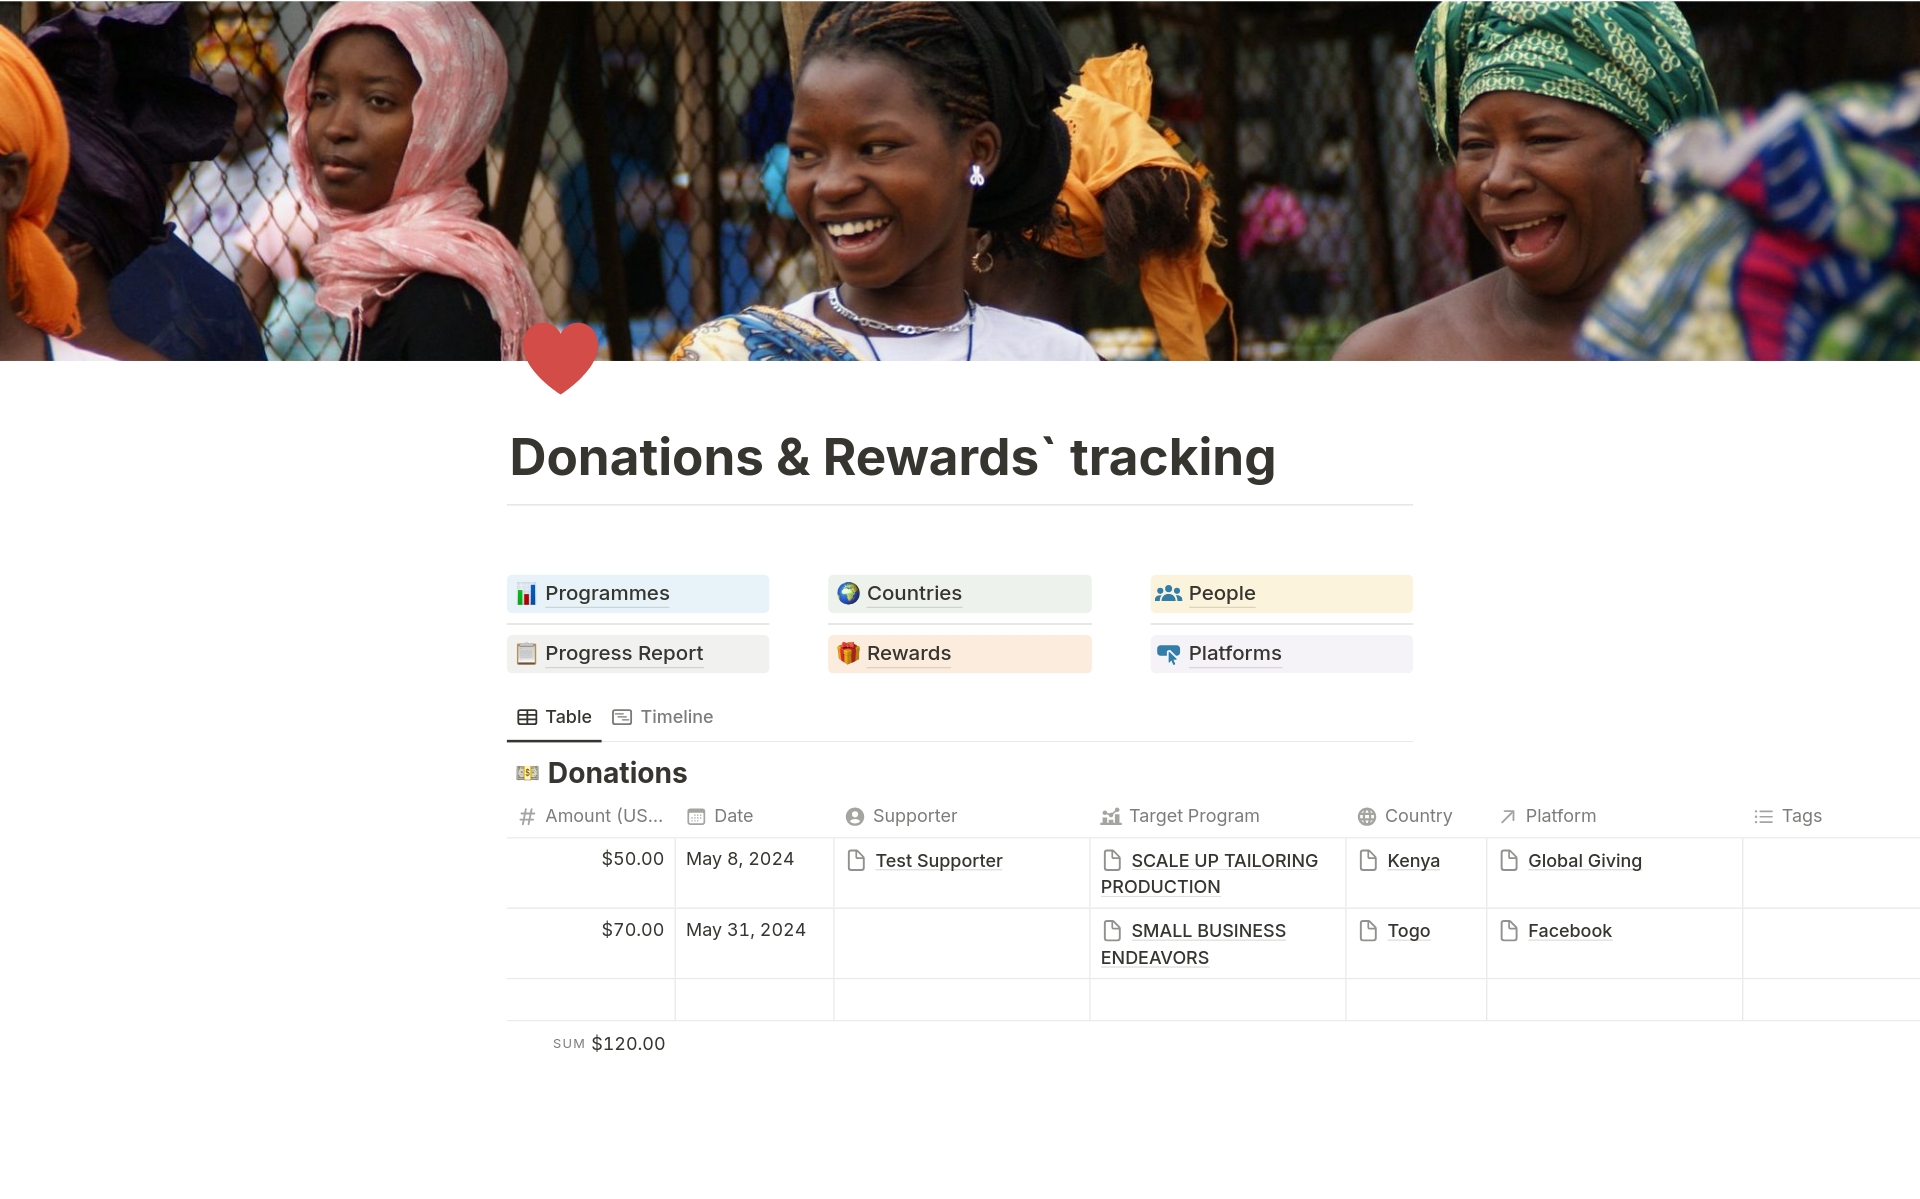 This template can be used to keep track of donations